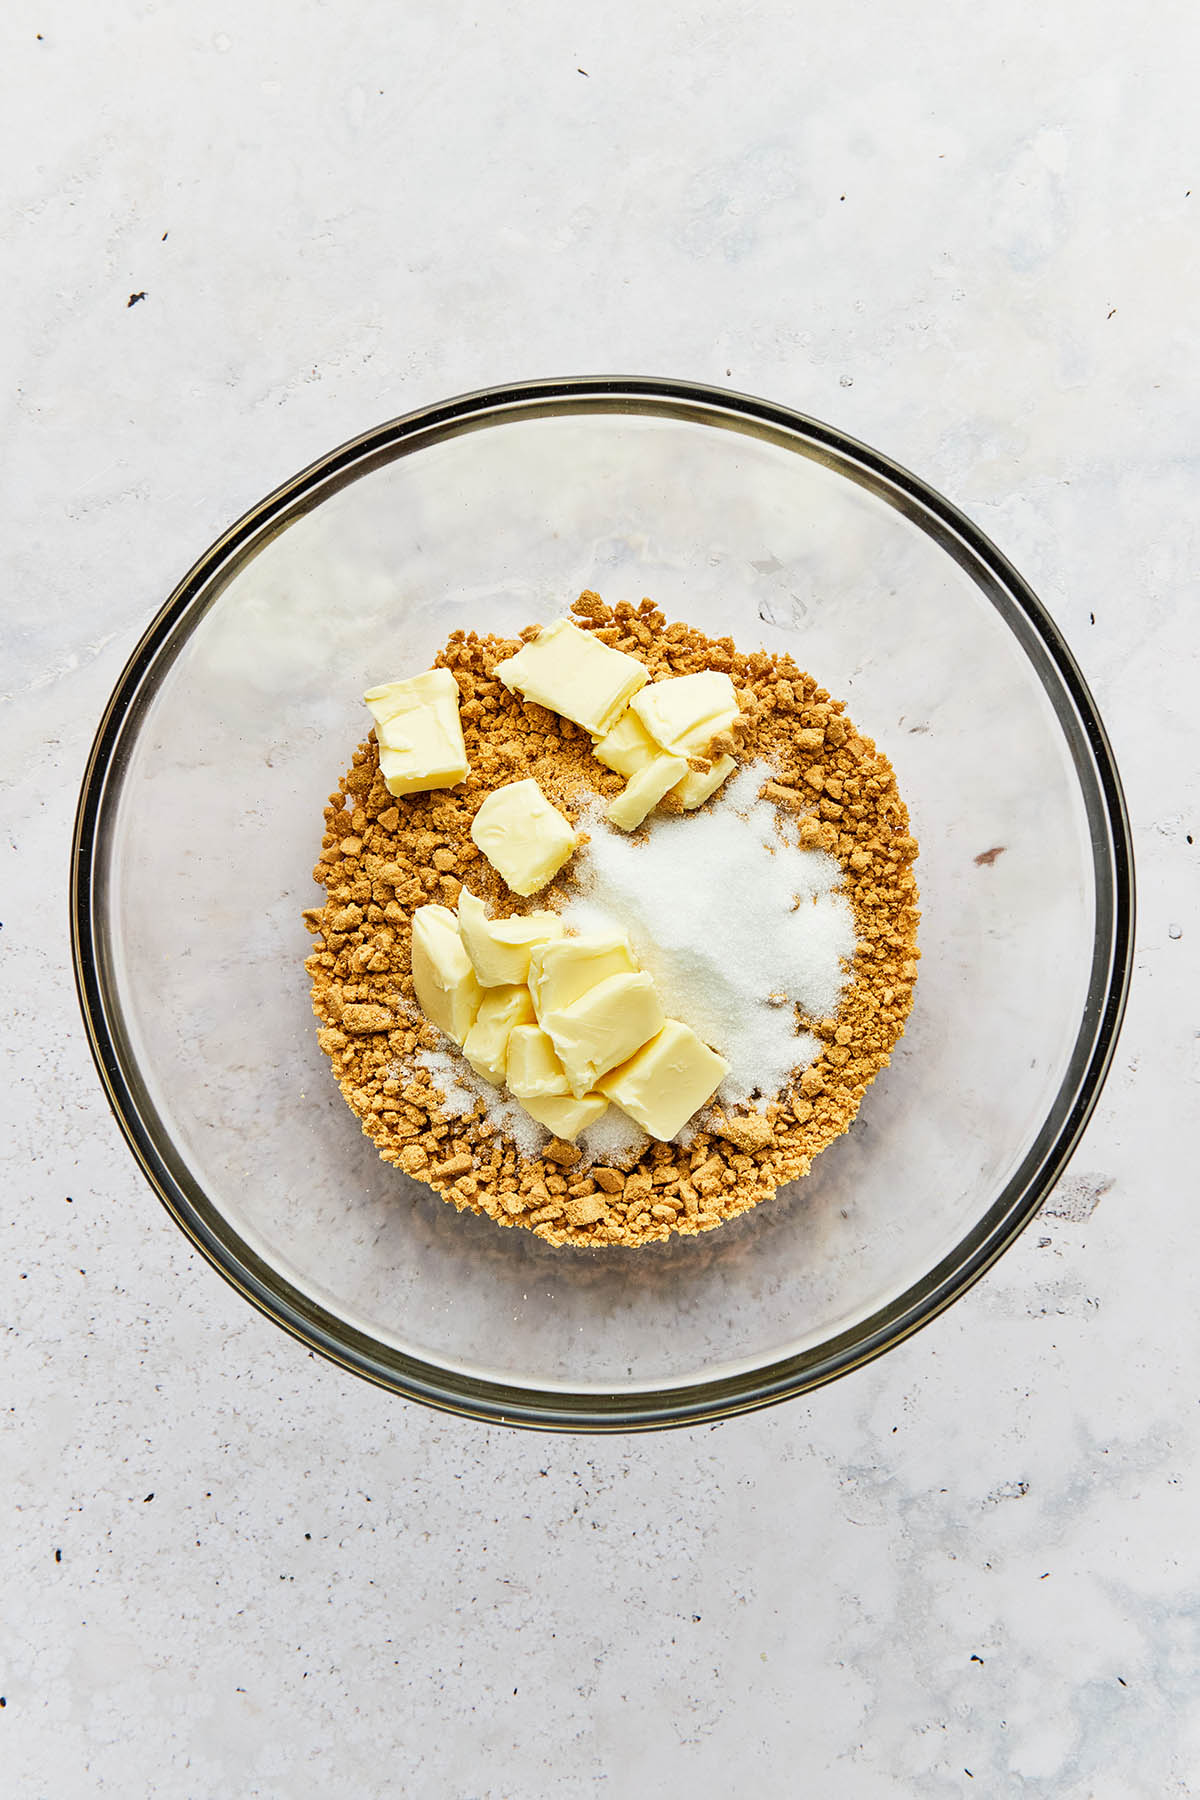 Crushed gluten-free graham cracker crumbs in a mixing bowl with chunks of butter and granulated sugar.